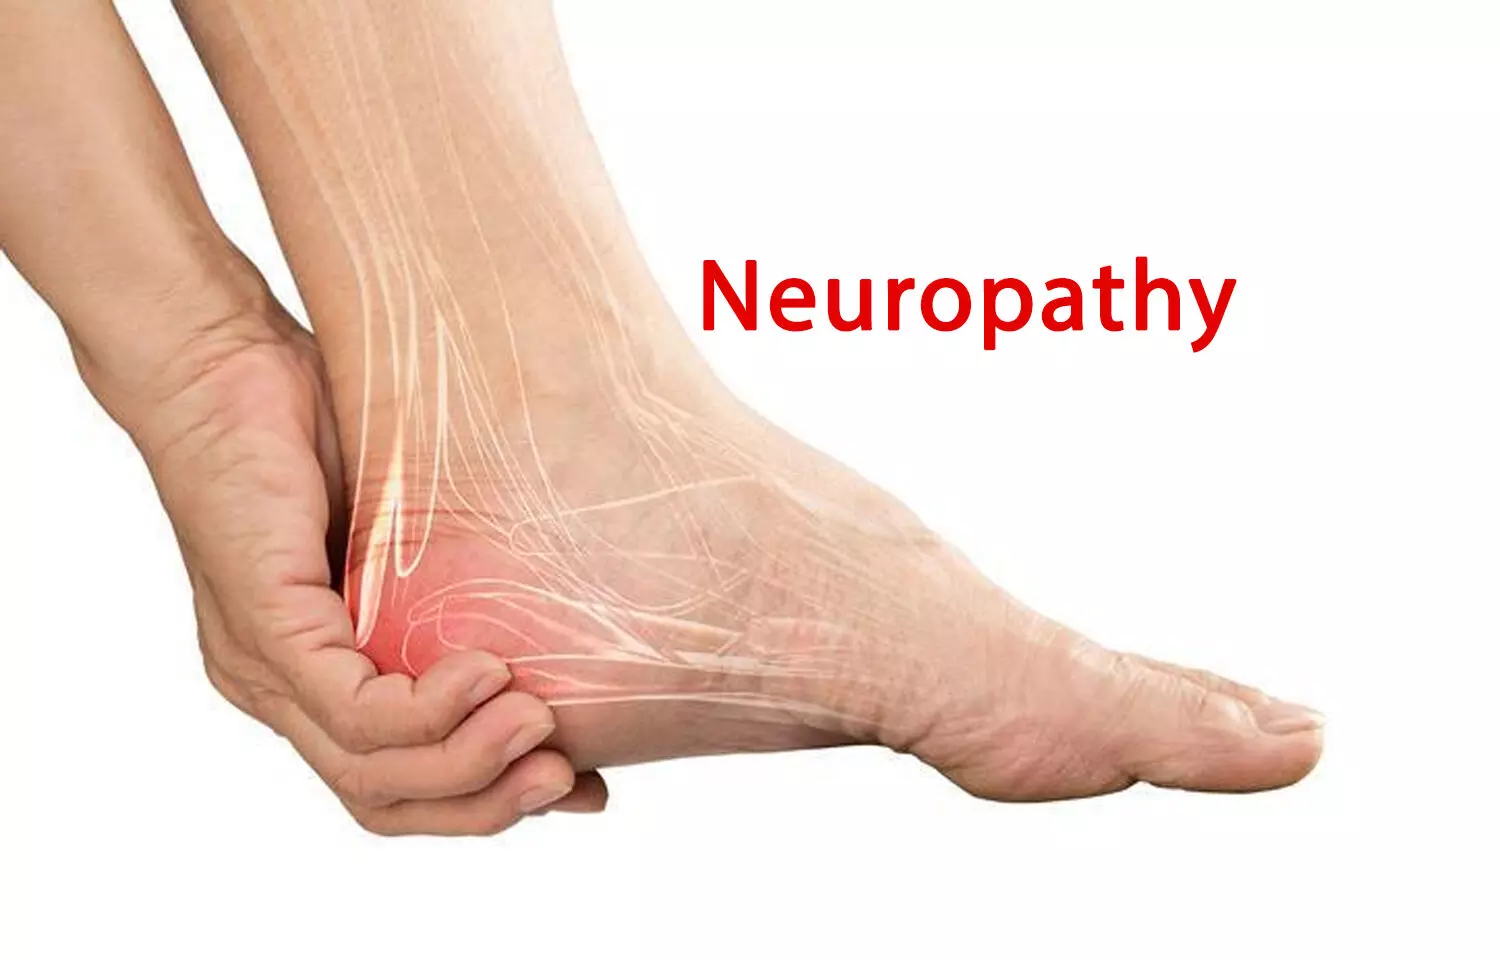 AAN Issues Guideline for Treatment of Painful Diabetic Neuropathy